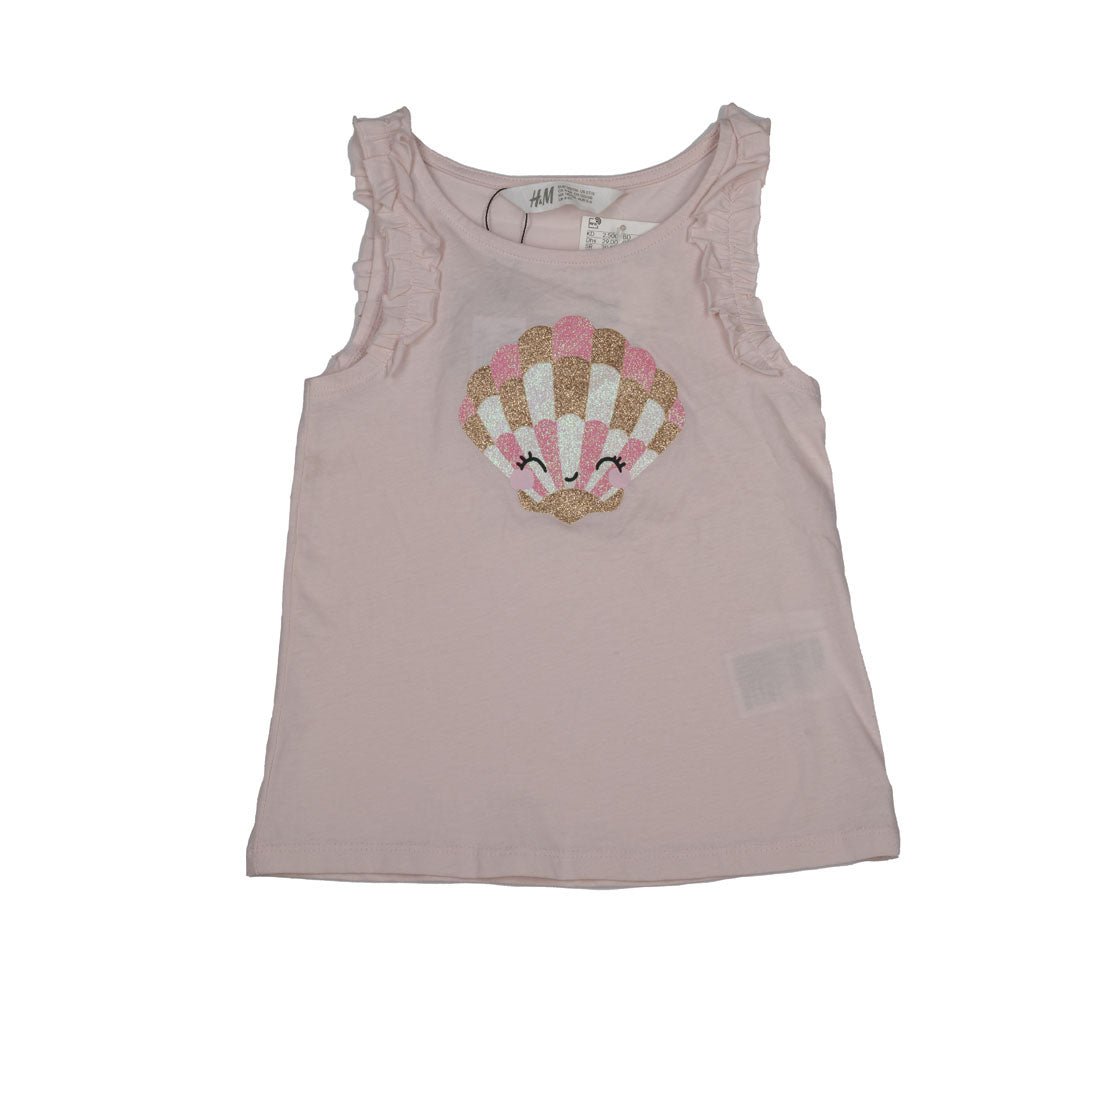 H&M Brand New Top For Girls - mymadstore.com